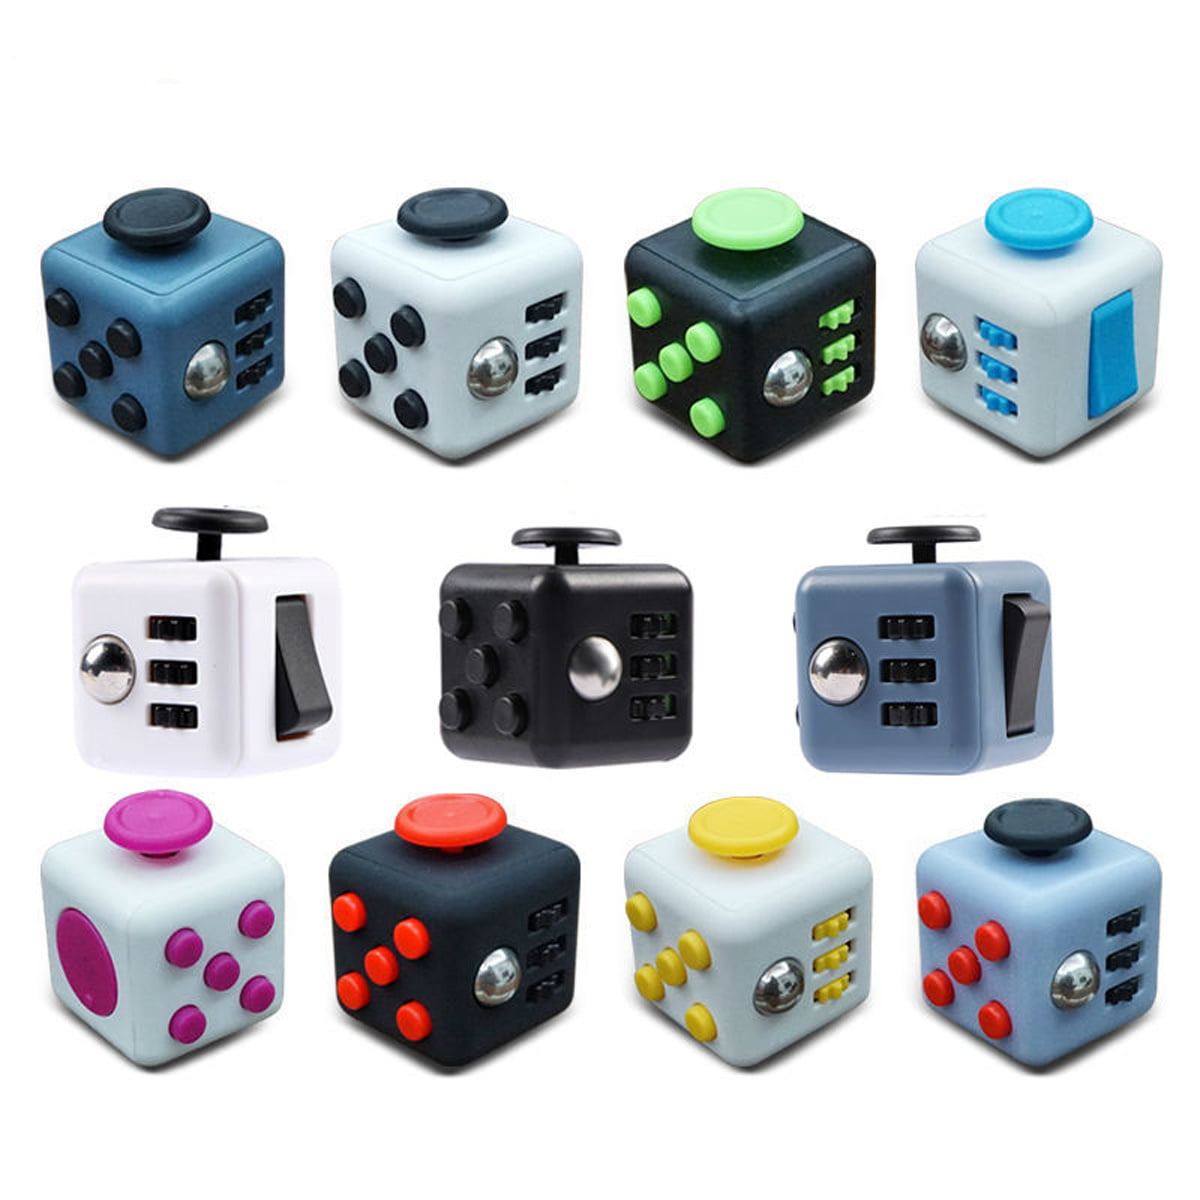 *IN STOCK* NEW 2017 FIDGET CUBE STRESS ANXIETY RELIEF 6 SIDED DESK TOY @ USA